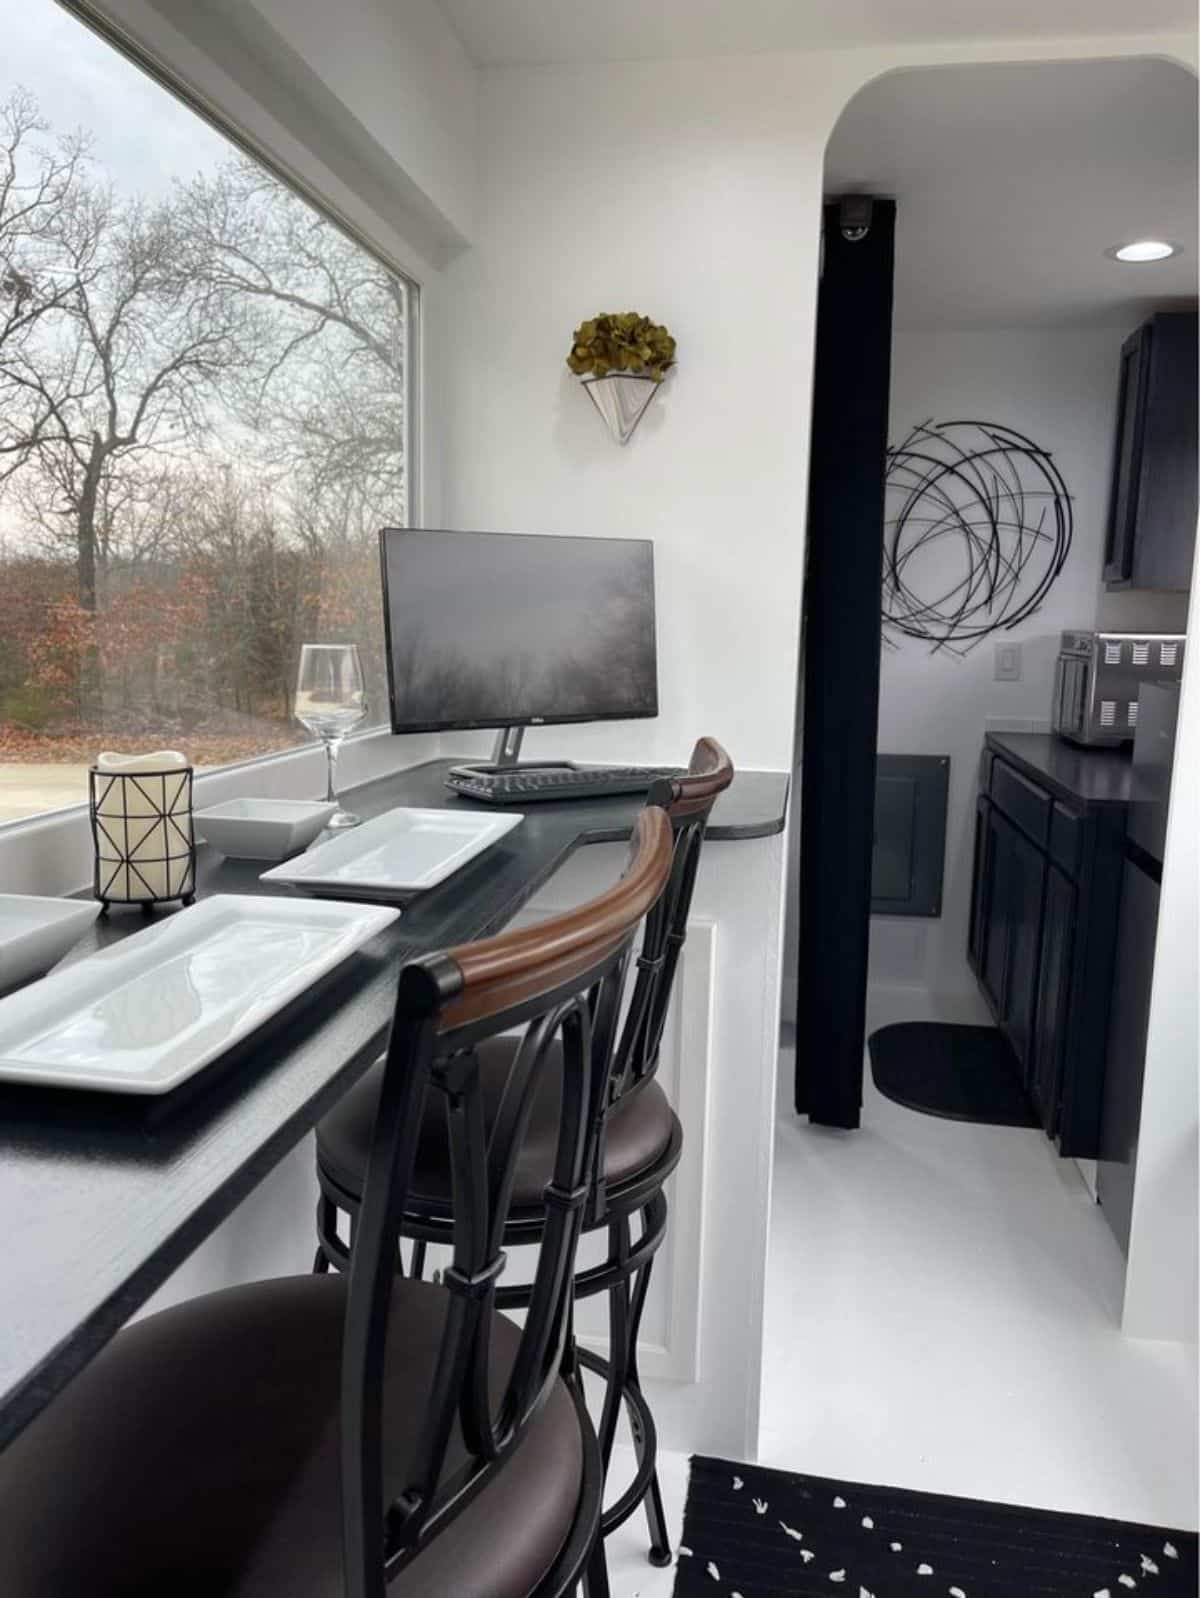 Huge window of with a view on dinning area of ultra affordable tiny home